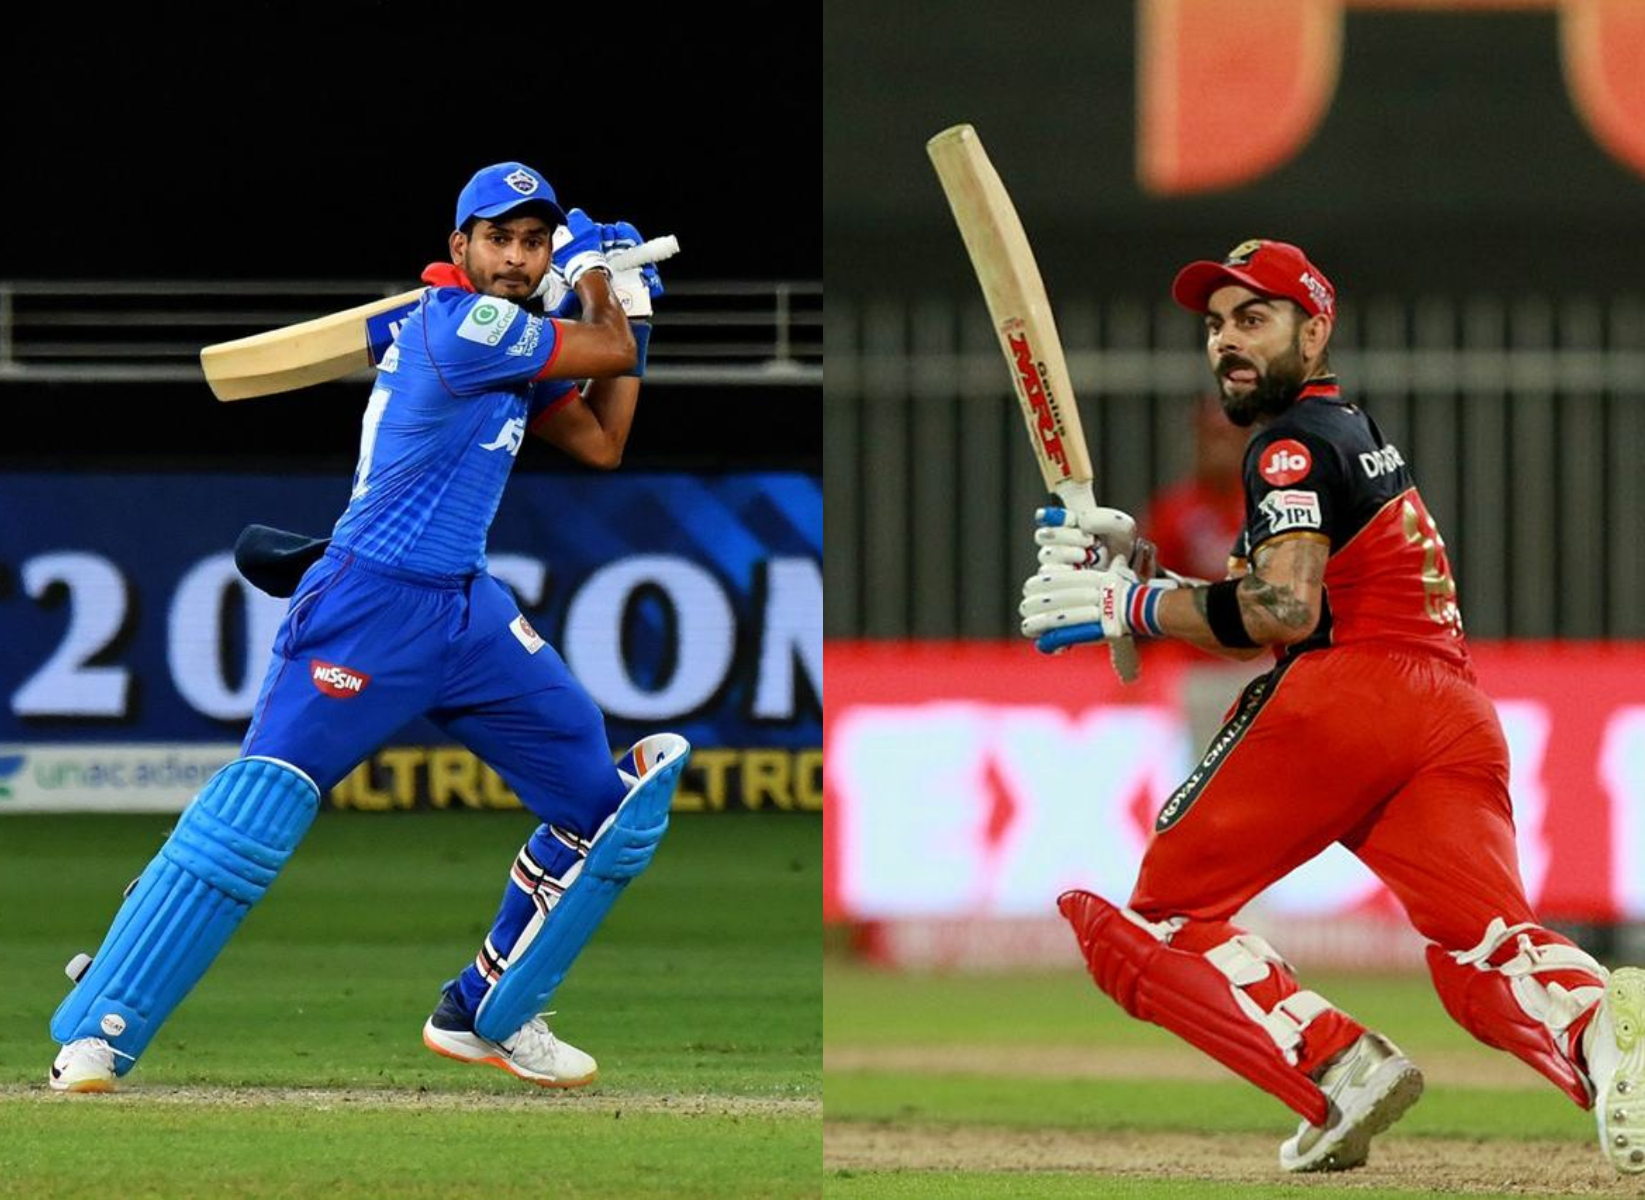 The winner of this match will qualify for the IPL 2020 playoffs | BCCI/IPL